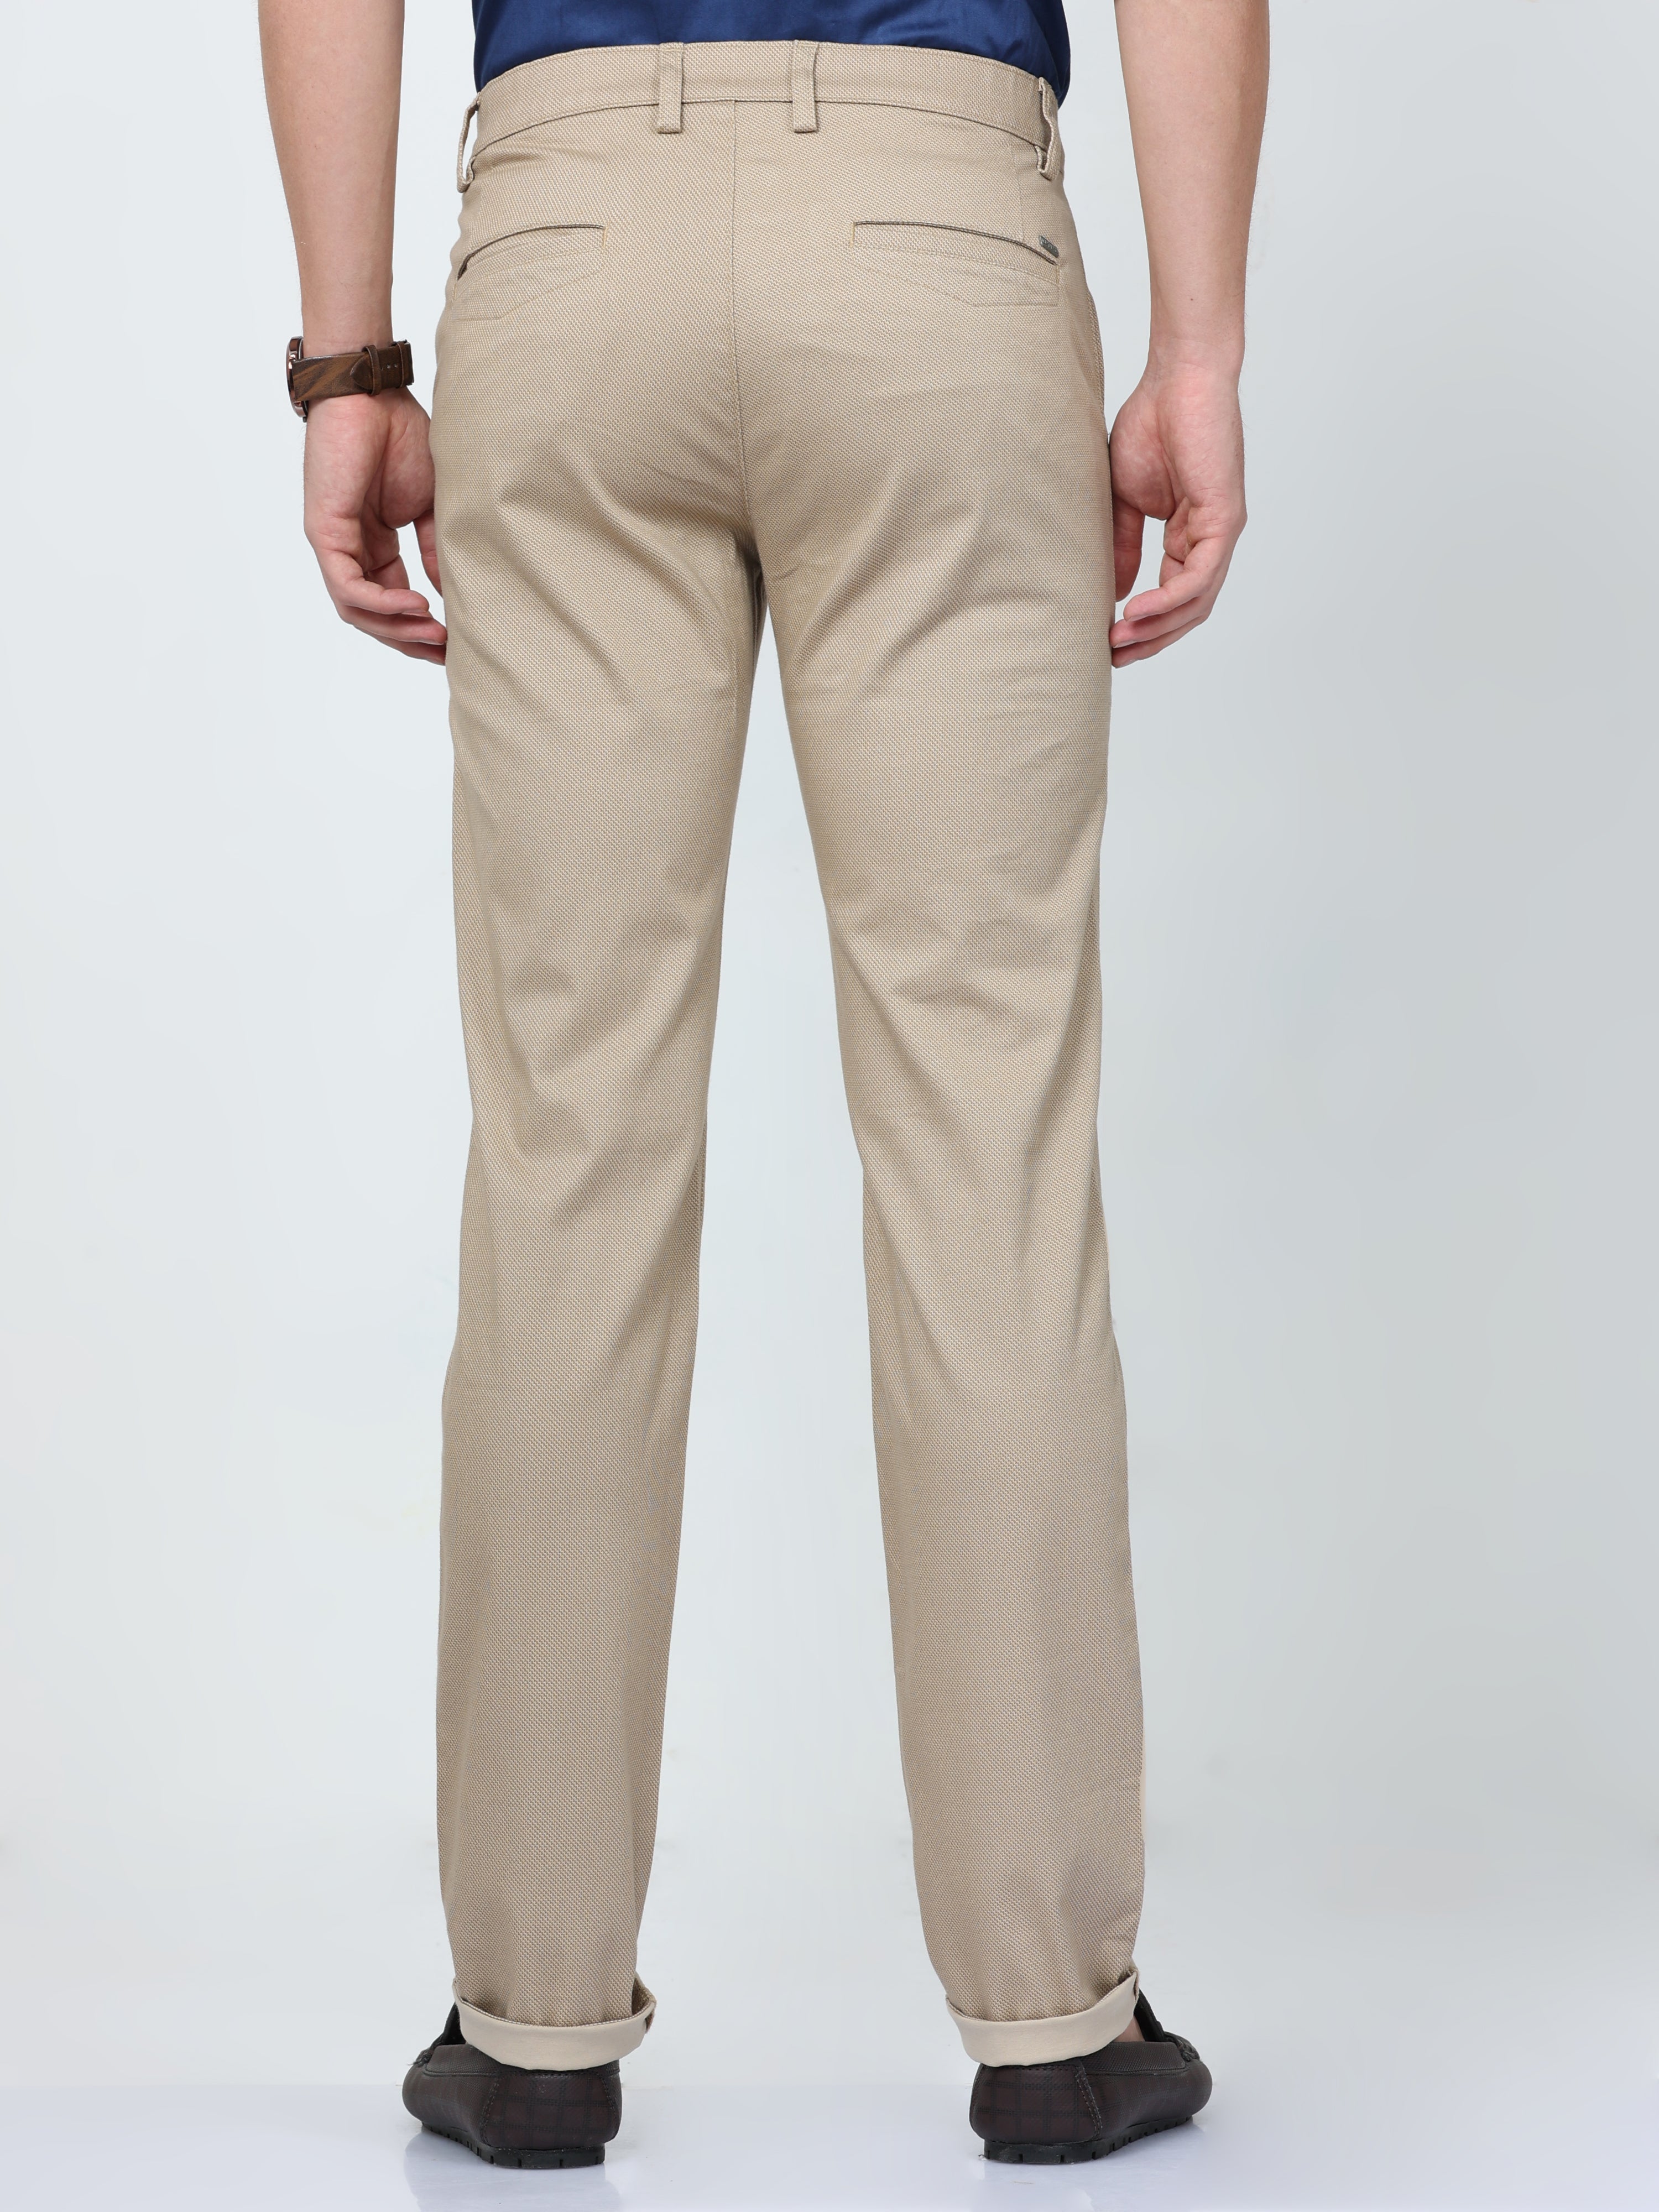 CP BRO Mens Chiesel Fit Dotted Cream Color Trousers | Tbo2-02 A-Crm-Cf-Ly